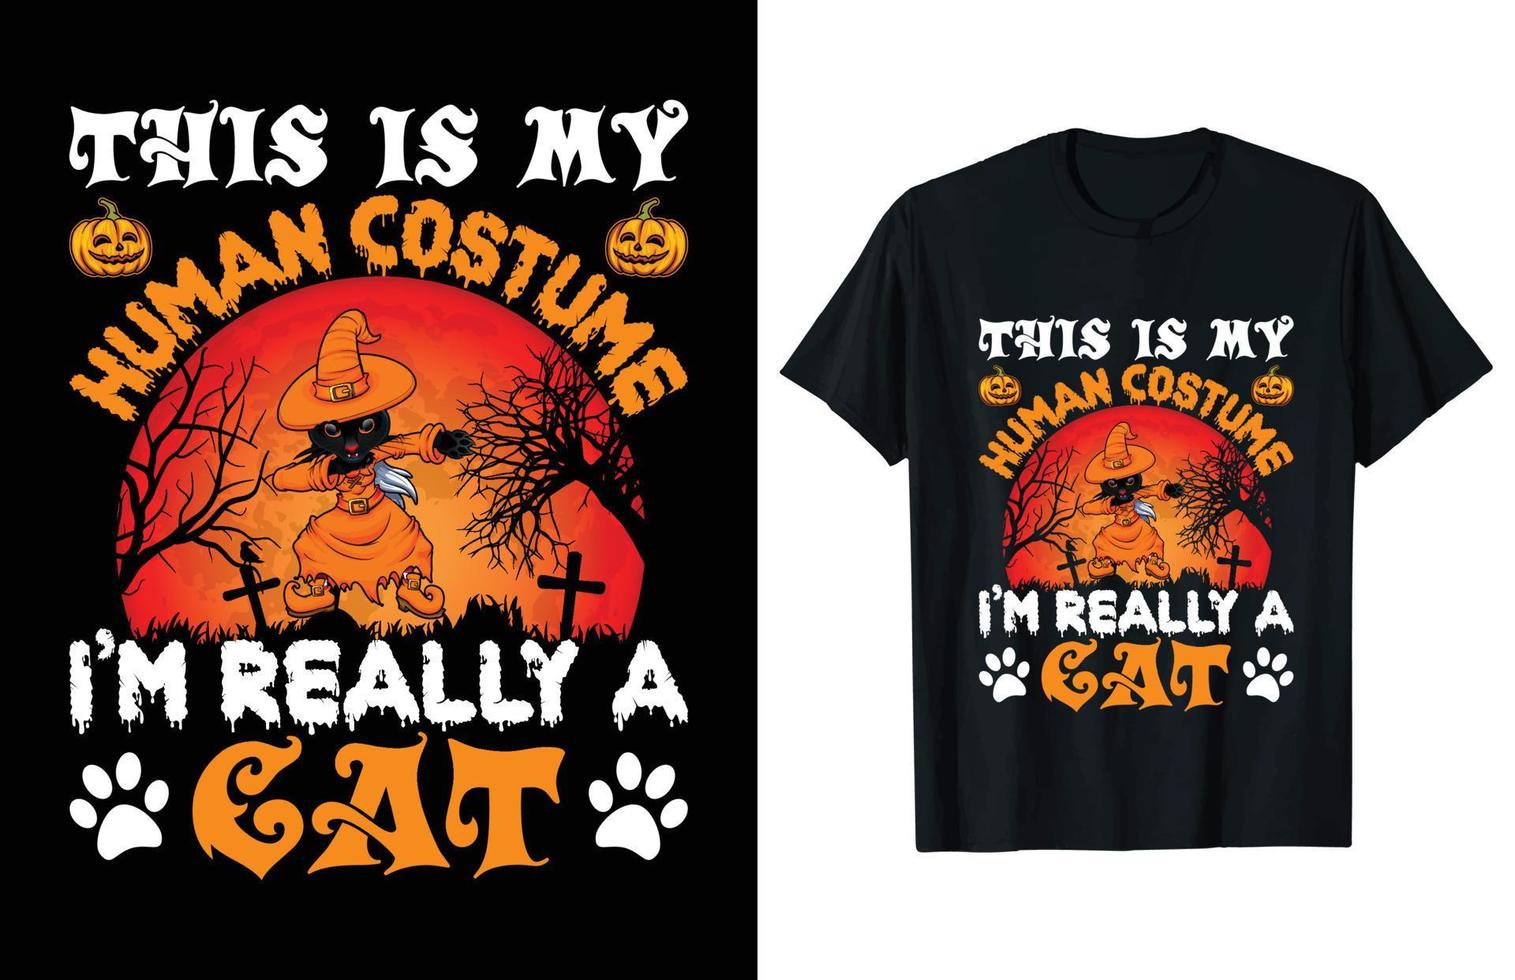 This is my human costume i'm a cat typography vintage halloween day t-shirt design vector